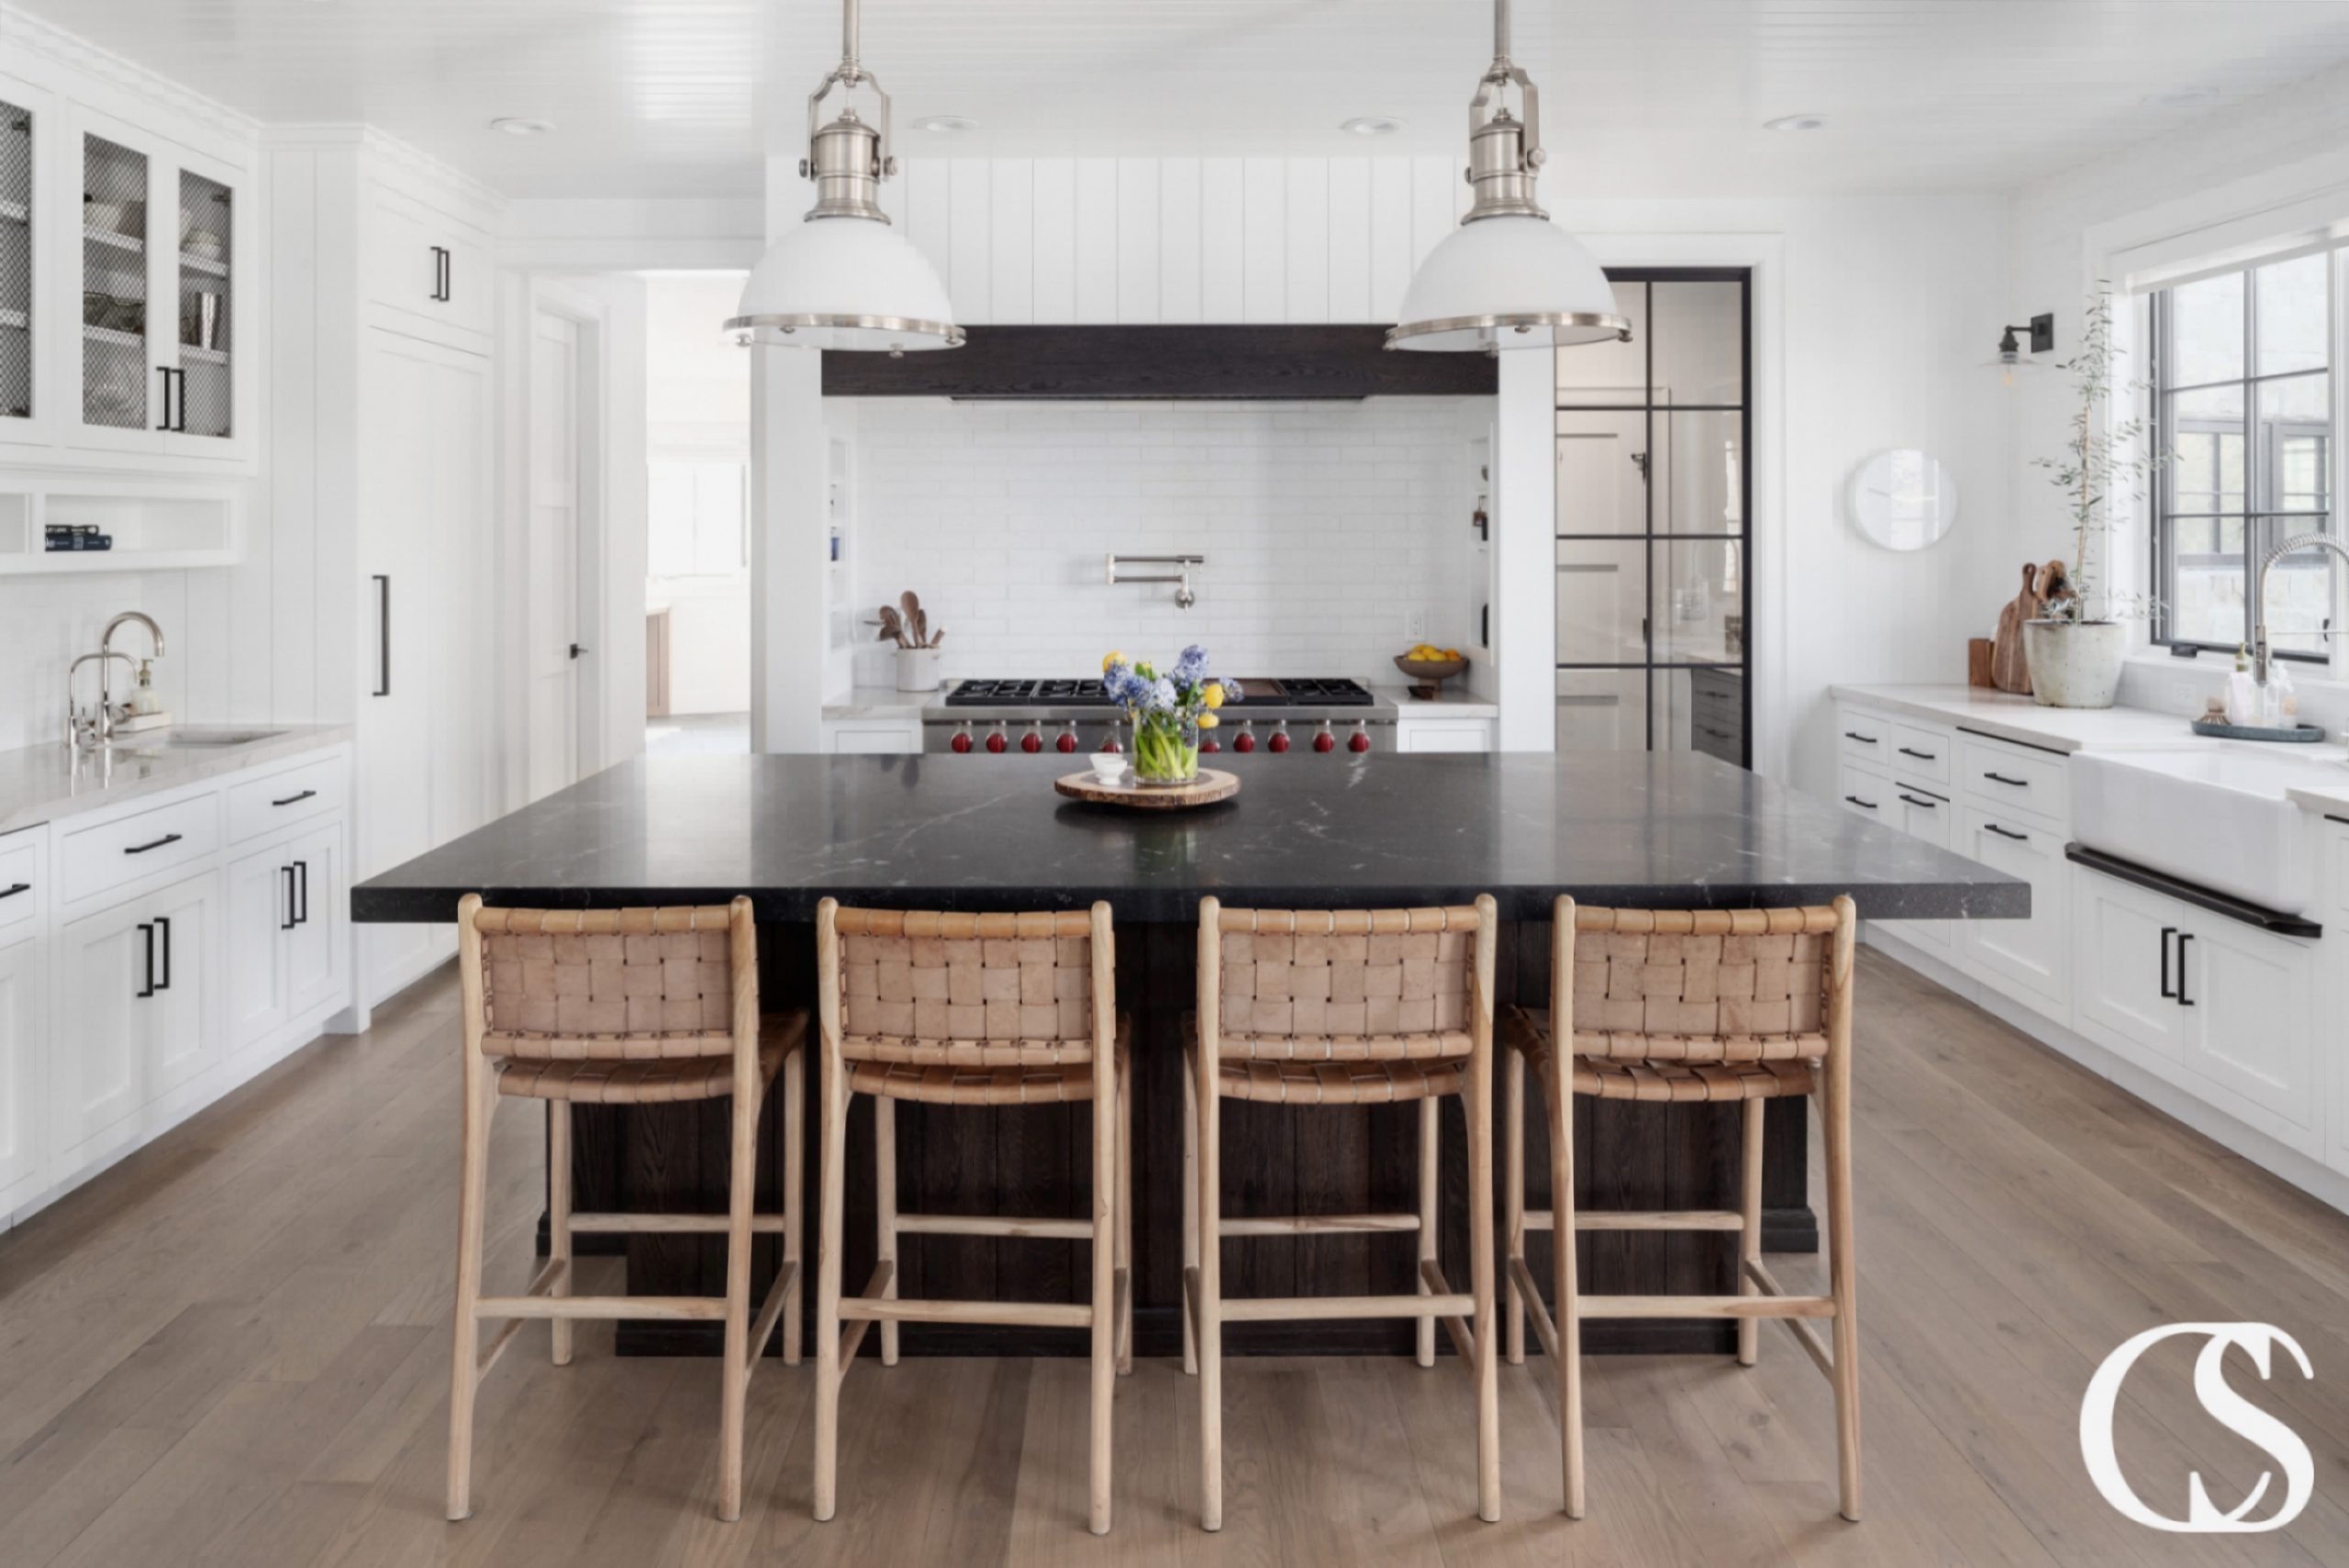 Black kitchen island with ample storage and seating, perfect for a modern and sleek kitchen design.